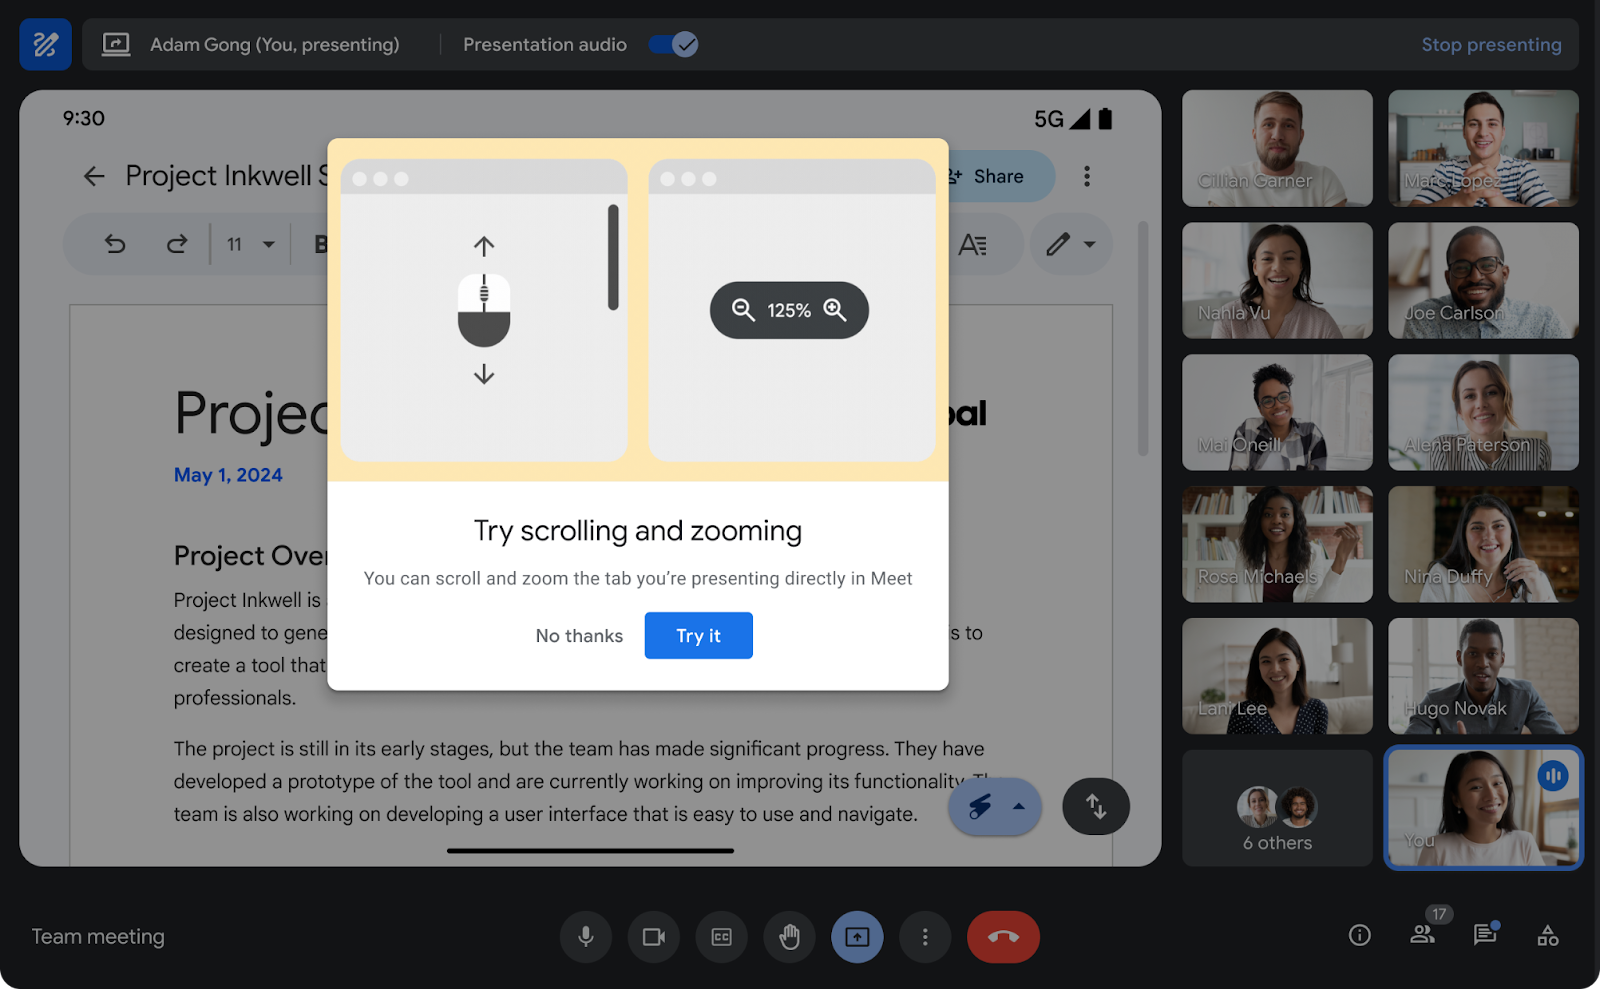 Scroll and zoom while presenting in Google Meet